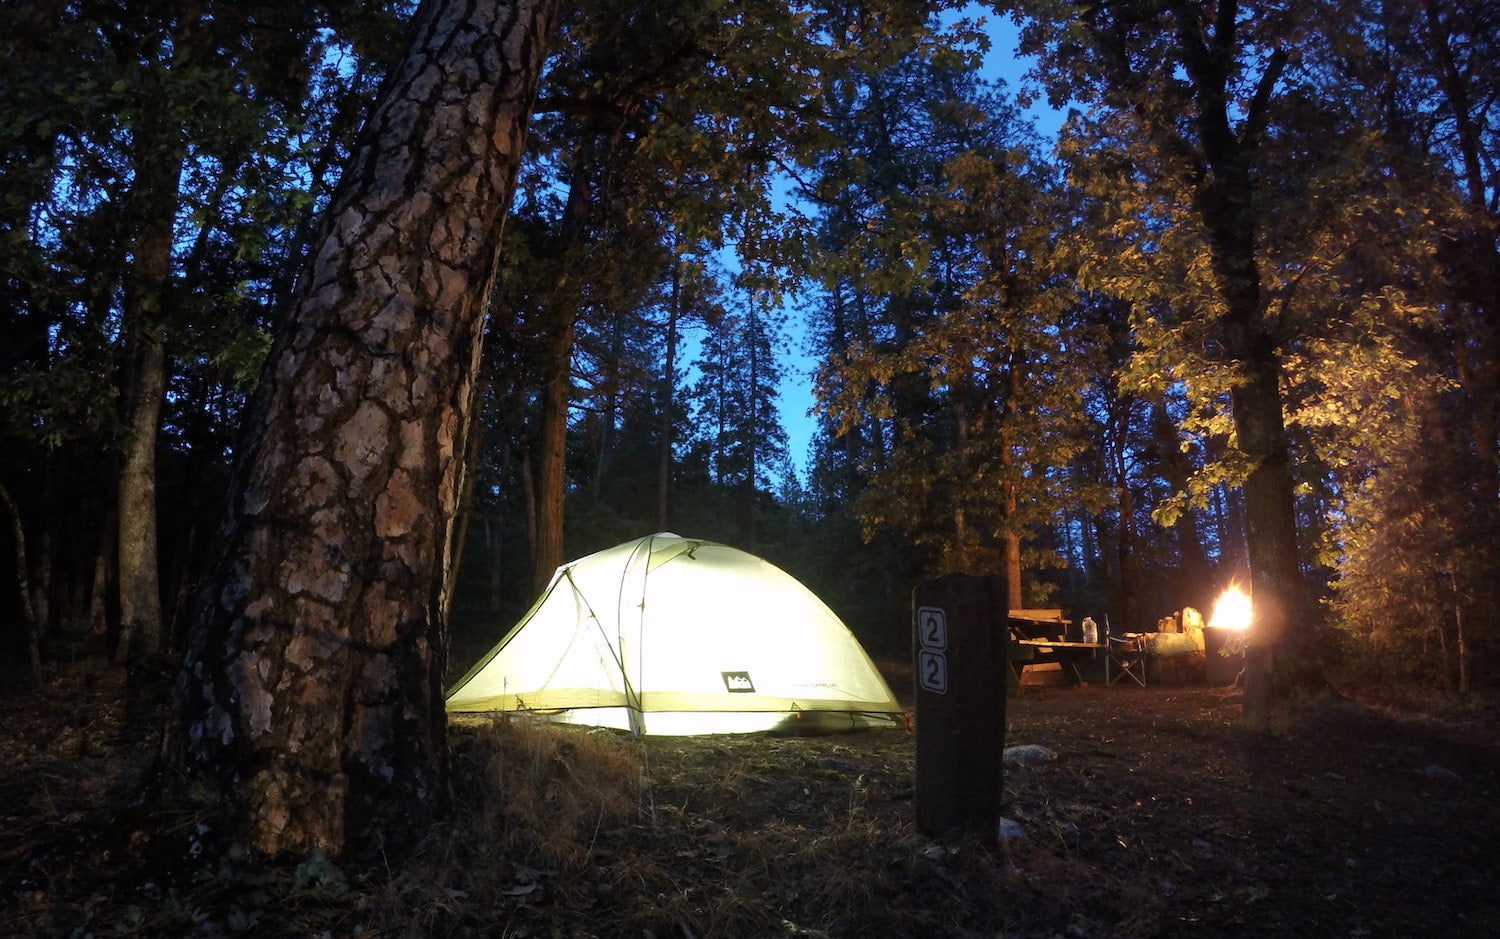 Castle Crags State Park snow camping